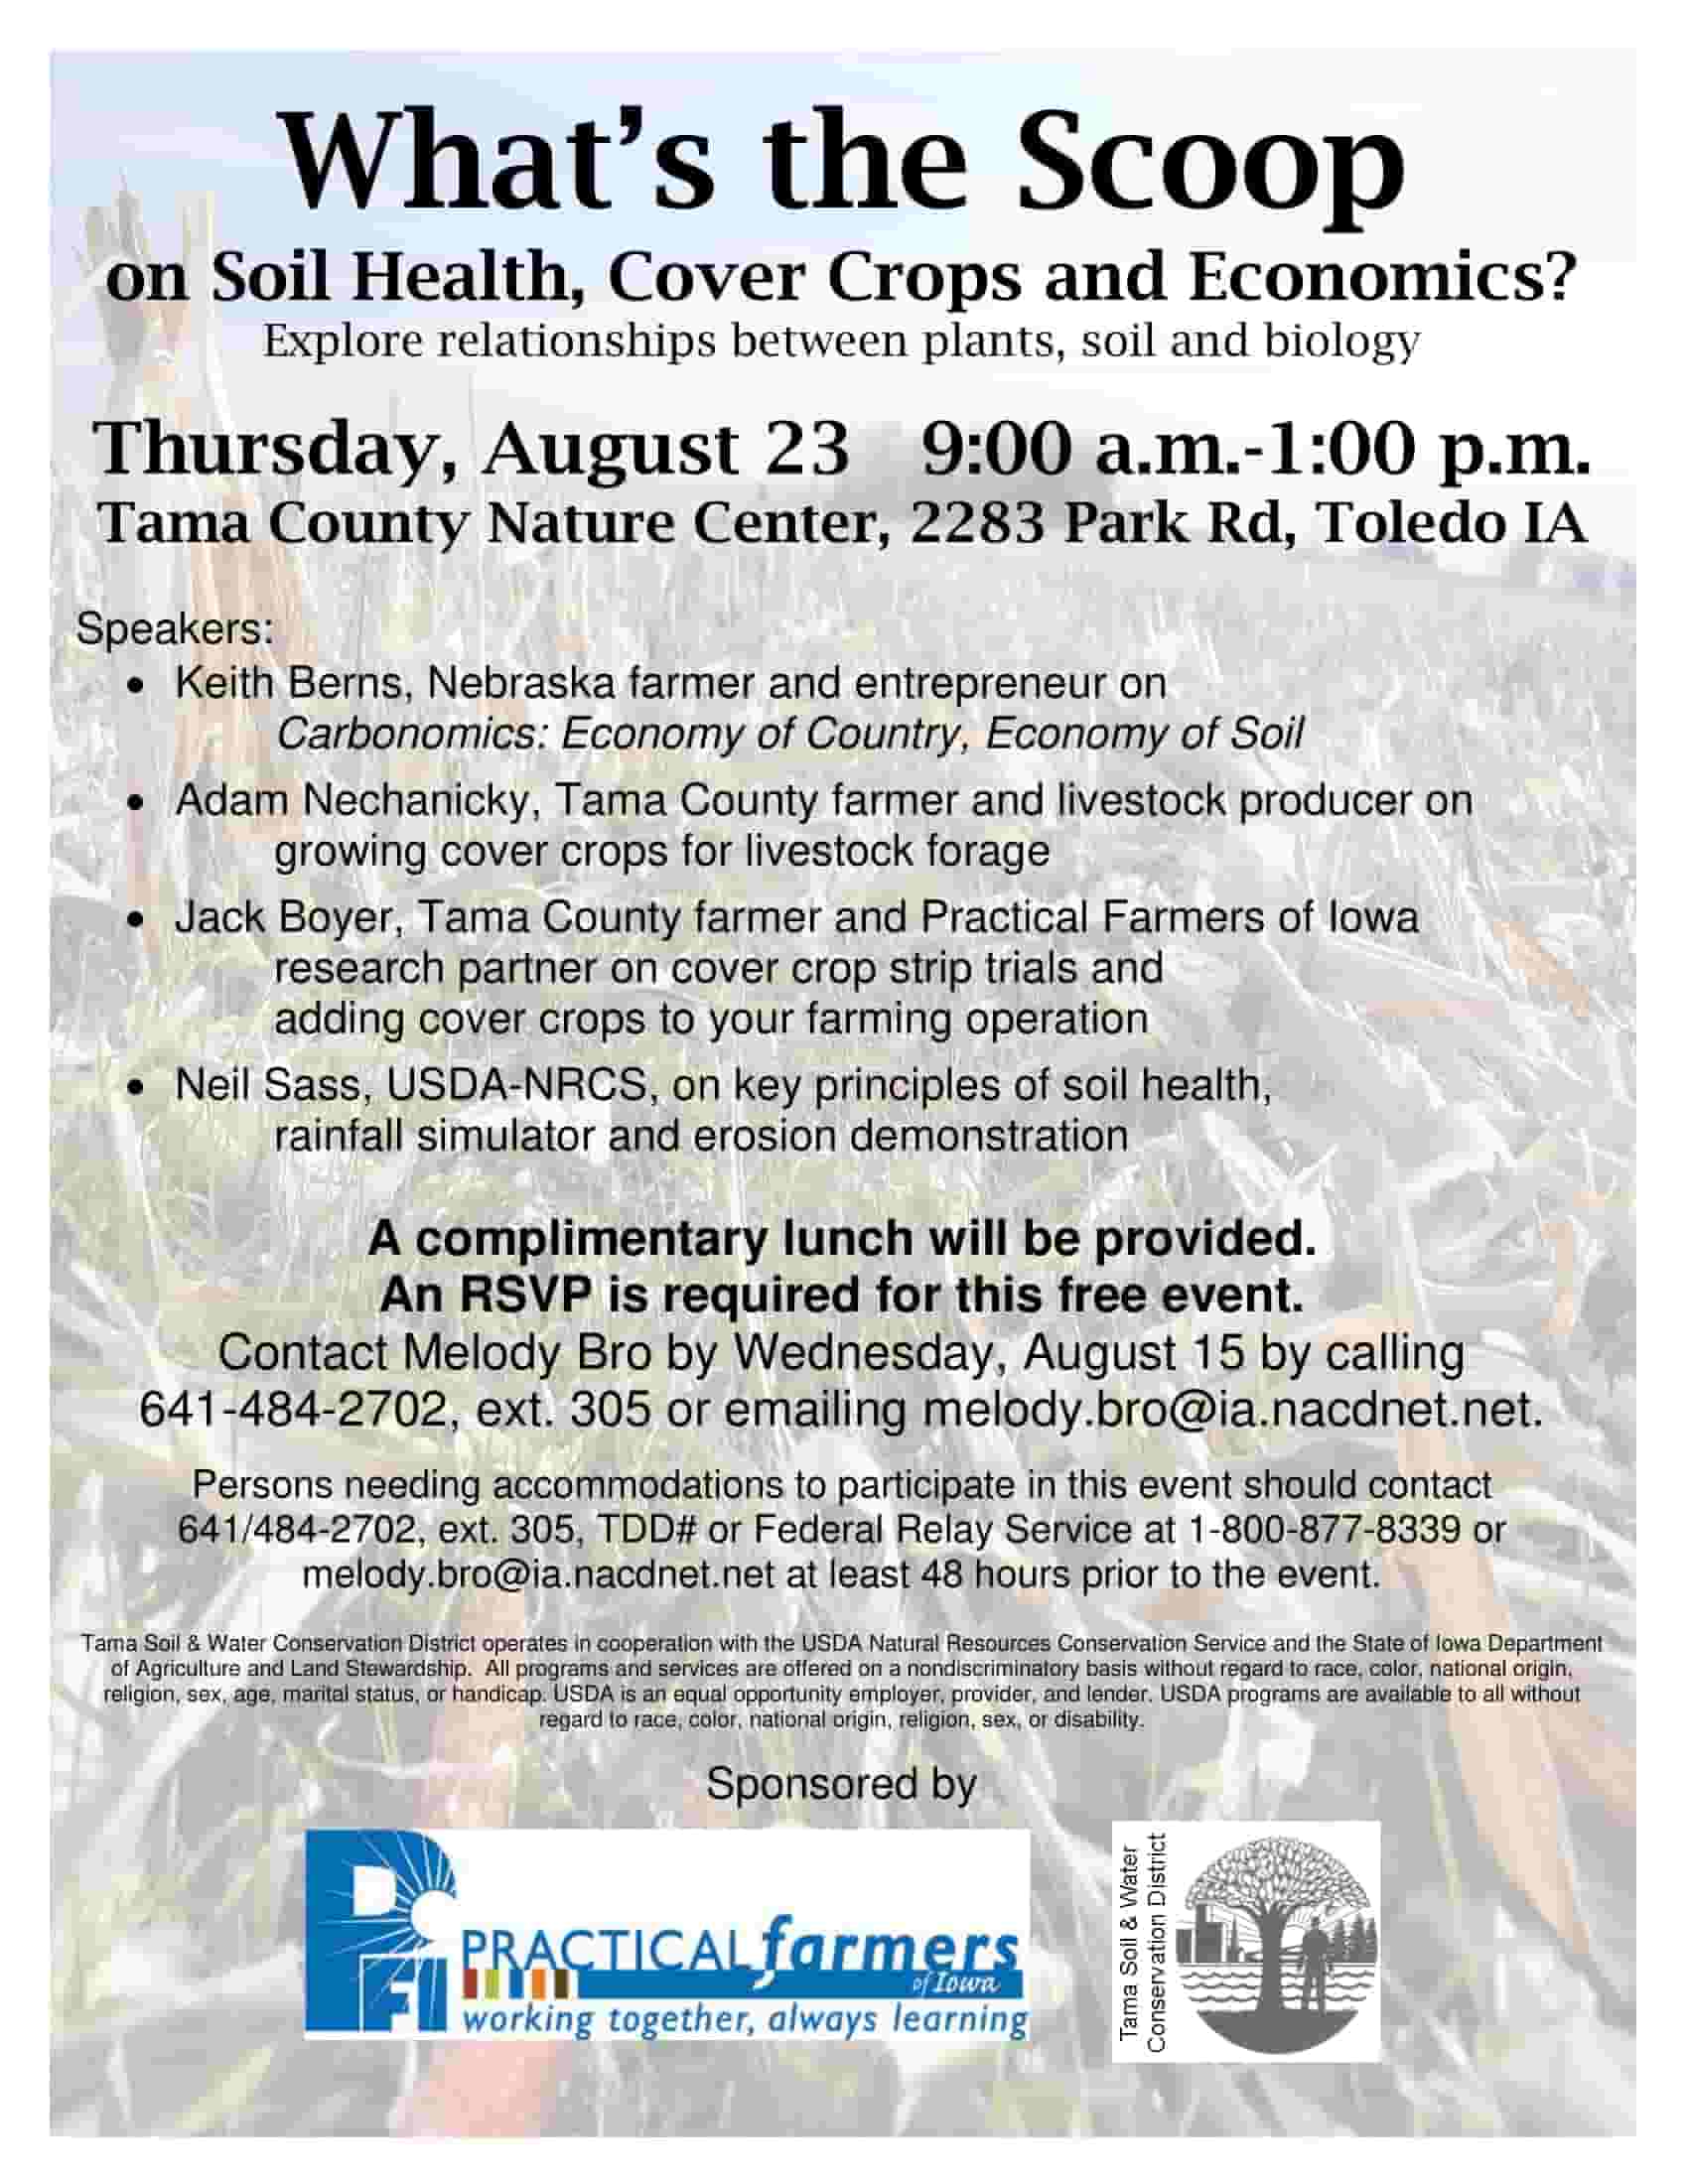 Field day flyer for event in Tama County about the relationships between plants, soil and biology as well as soil health, cover crops and economics